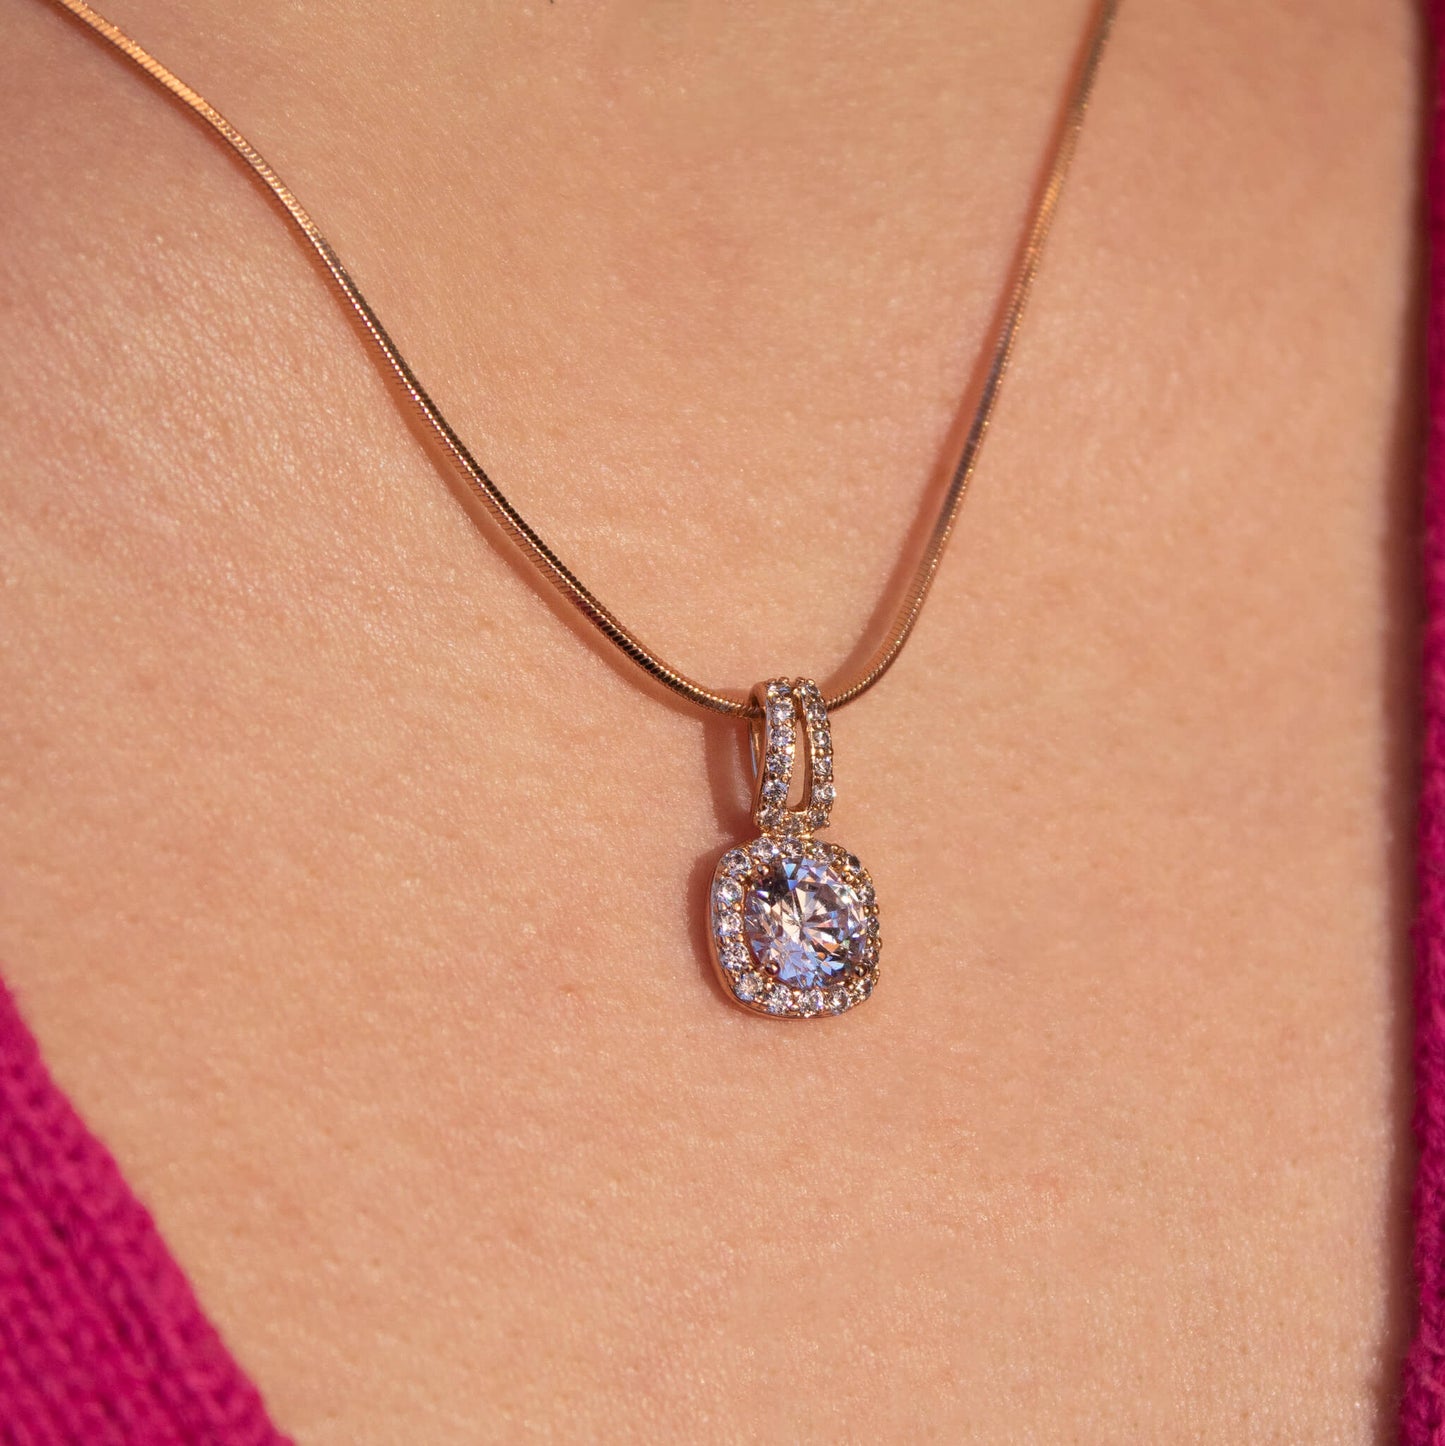 Necklace with a classic pendant